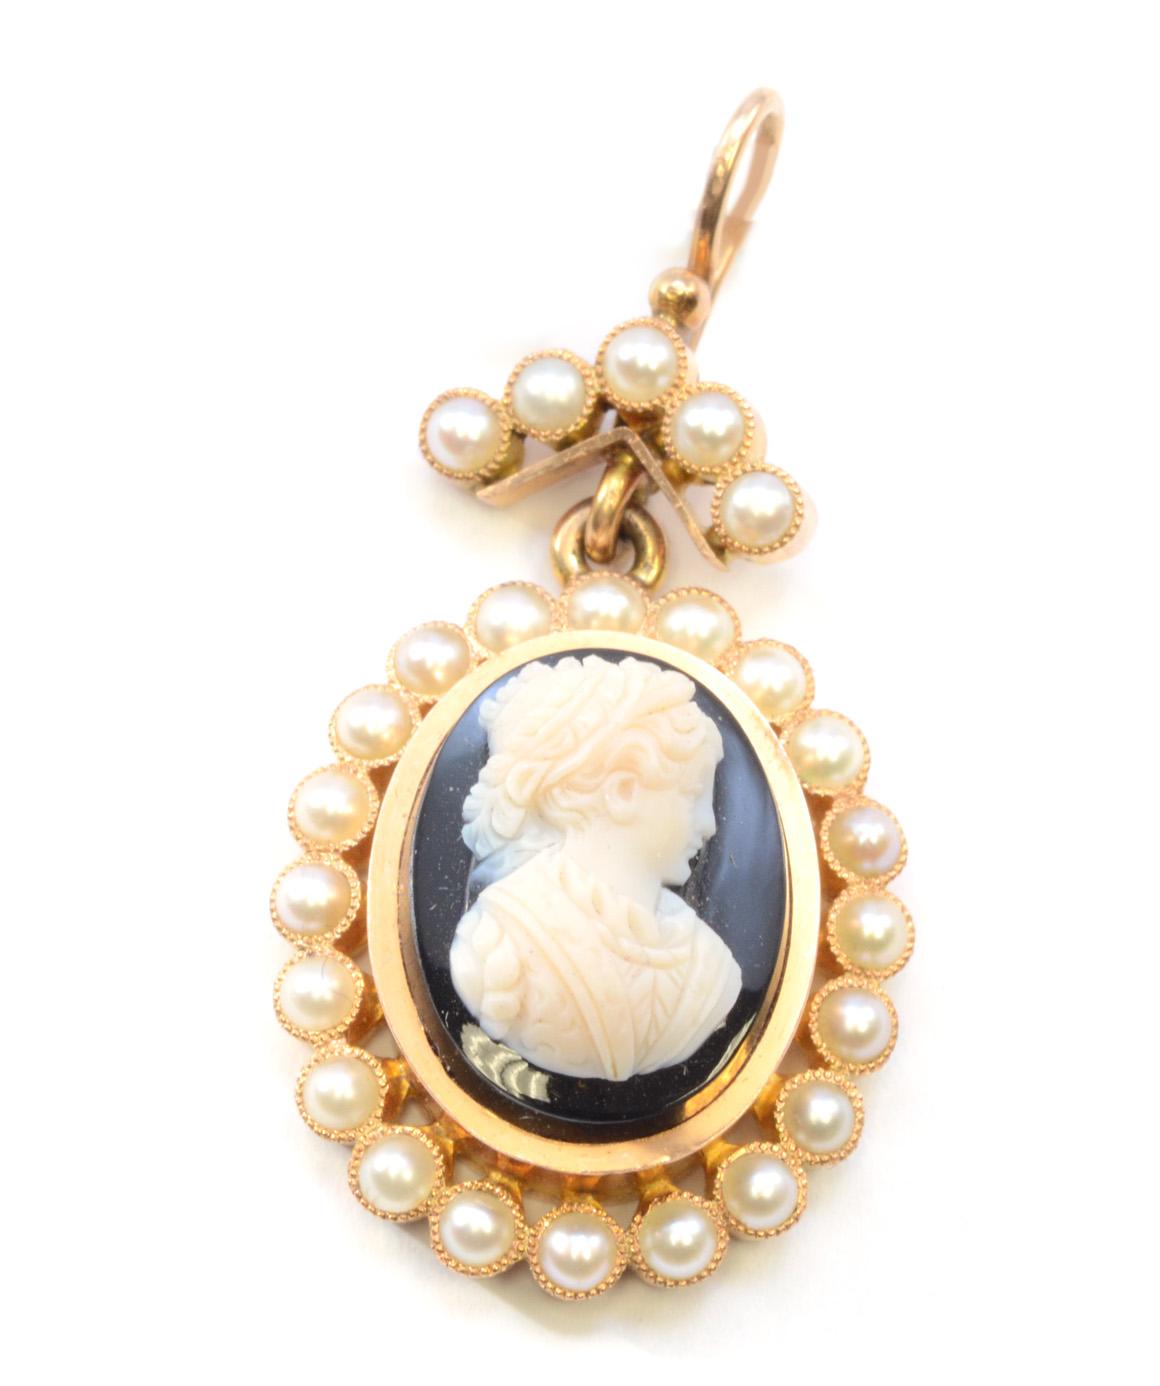 Solid 14 Karat Yellow Gold Antique Onyx and Pearl Cameo Pendant 5.8g 1